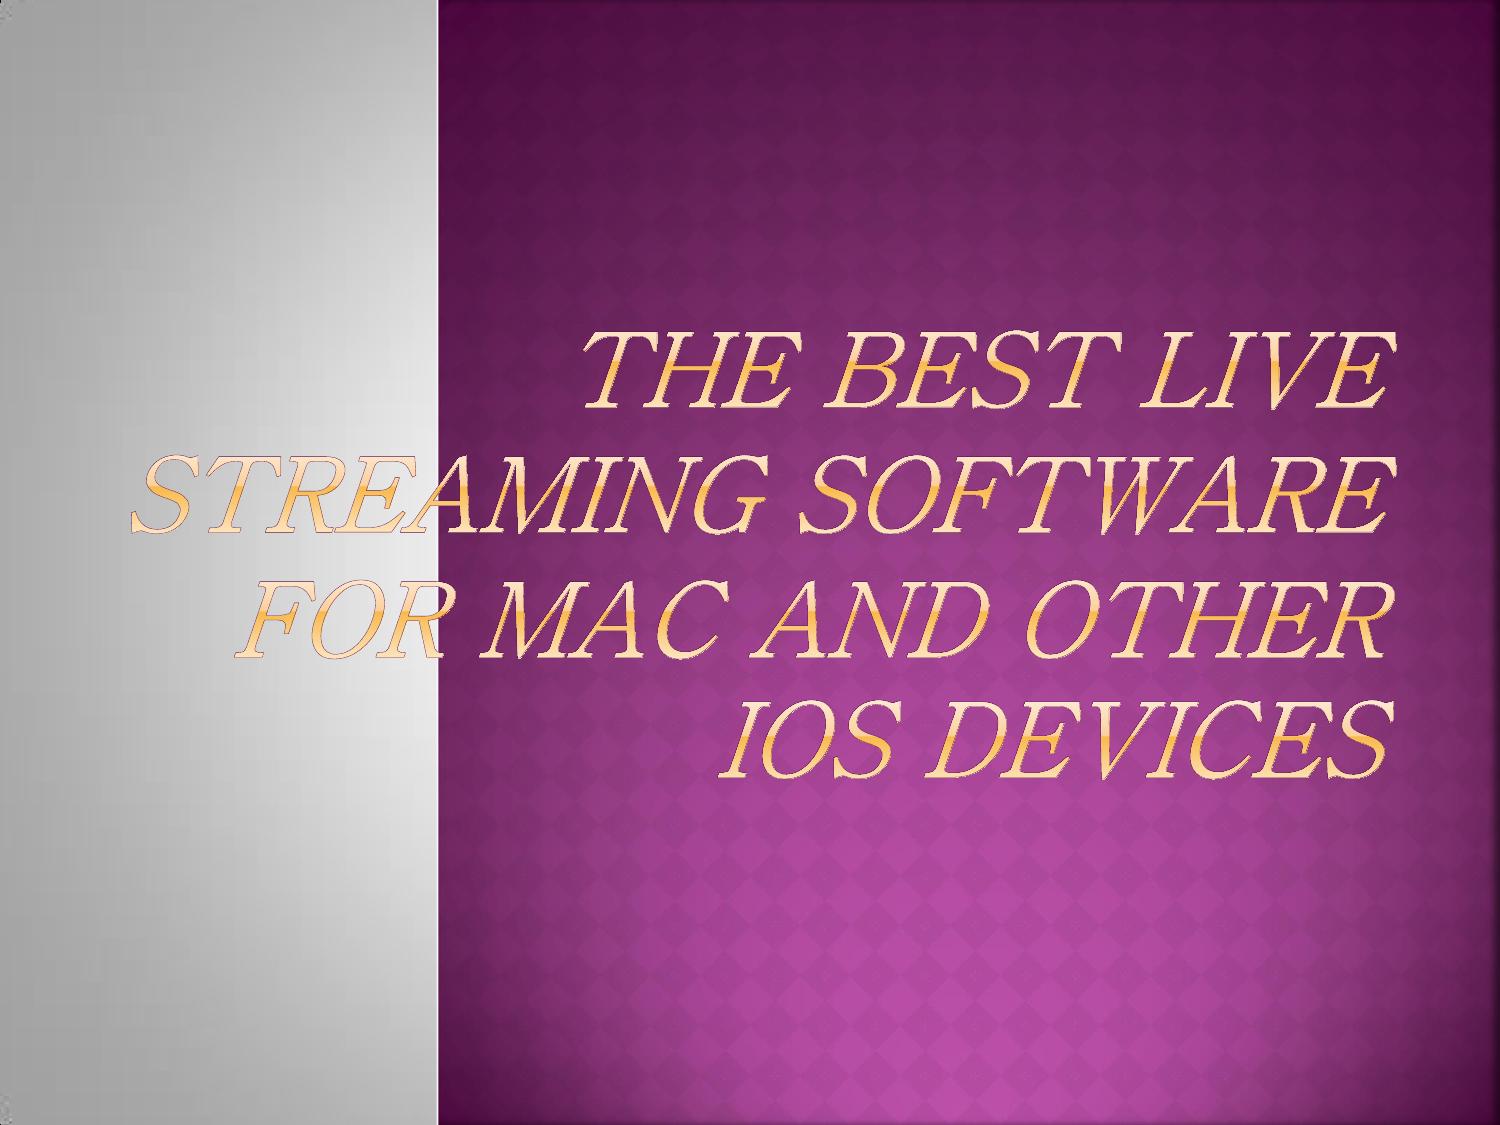 Best live tv streaming software for mac